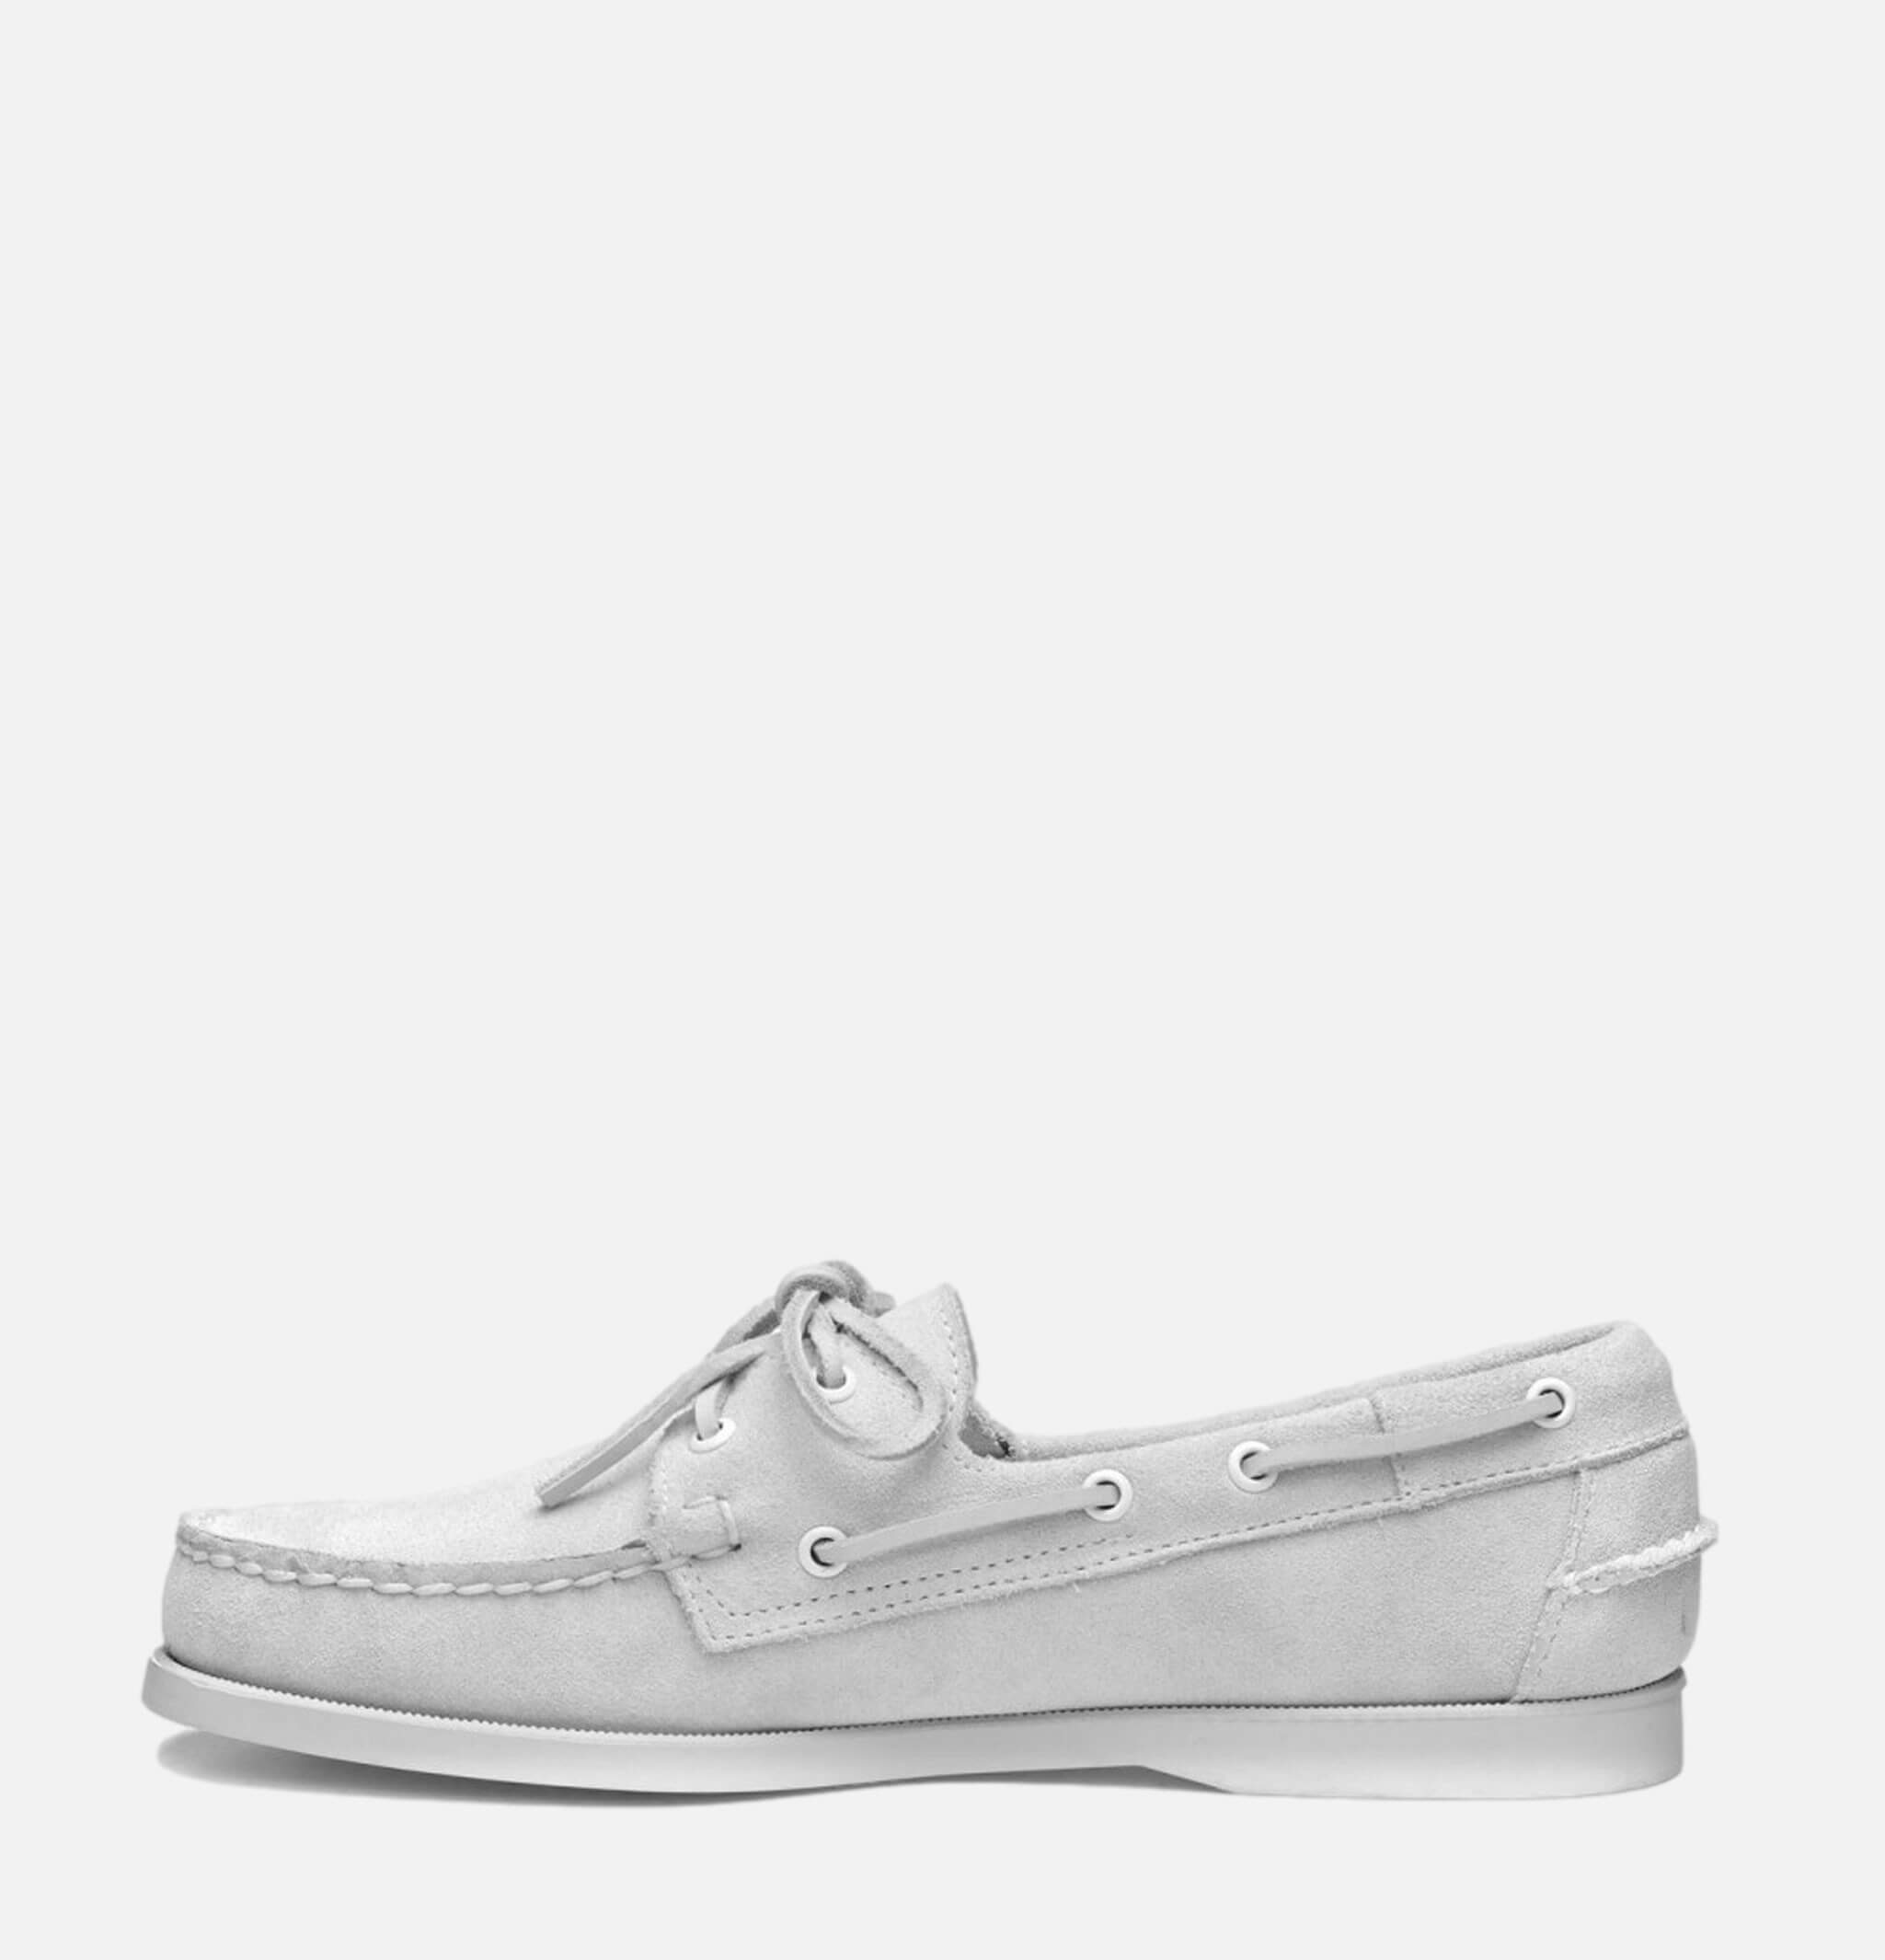 Docksides White Suede Shoes